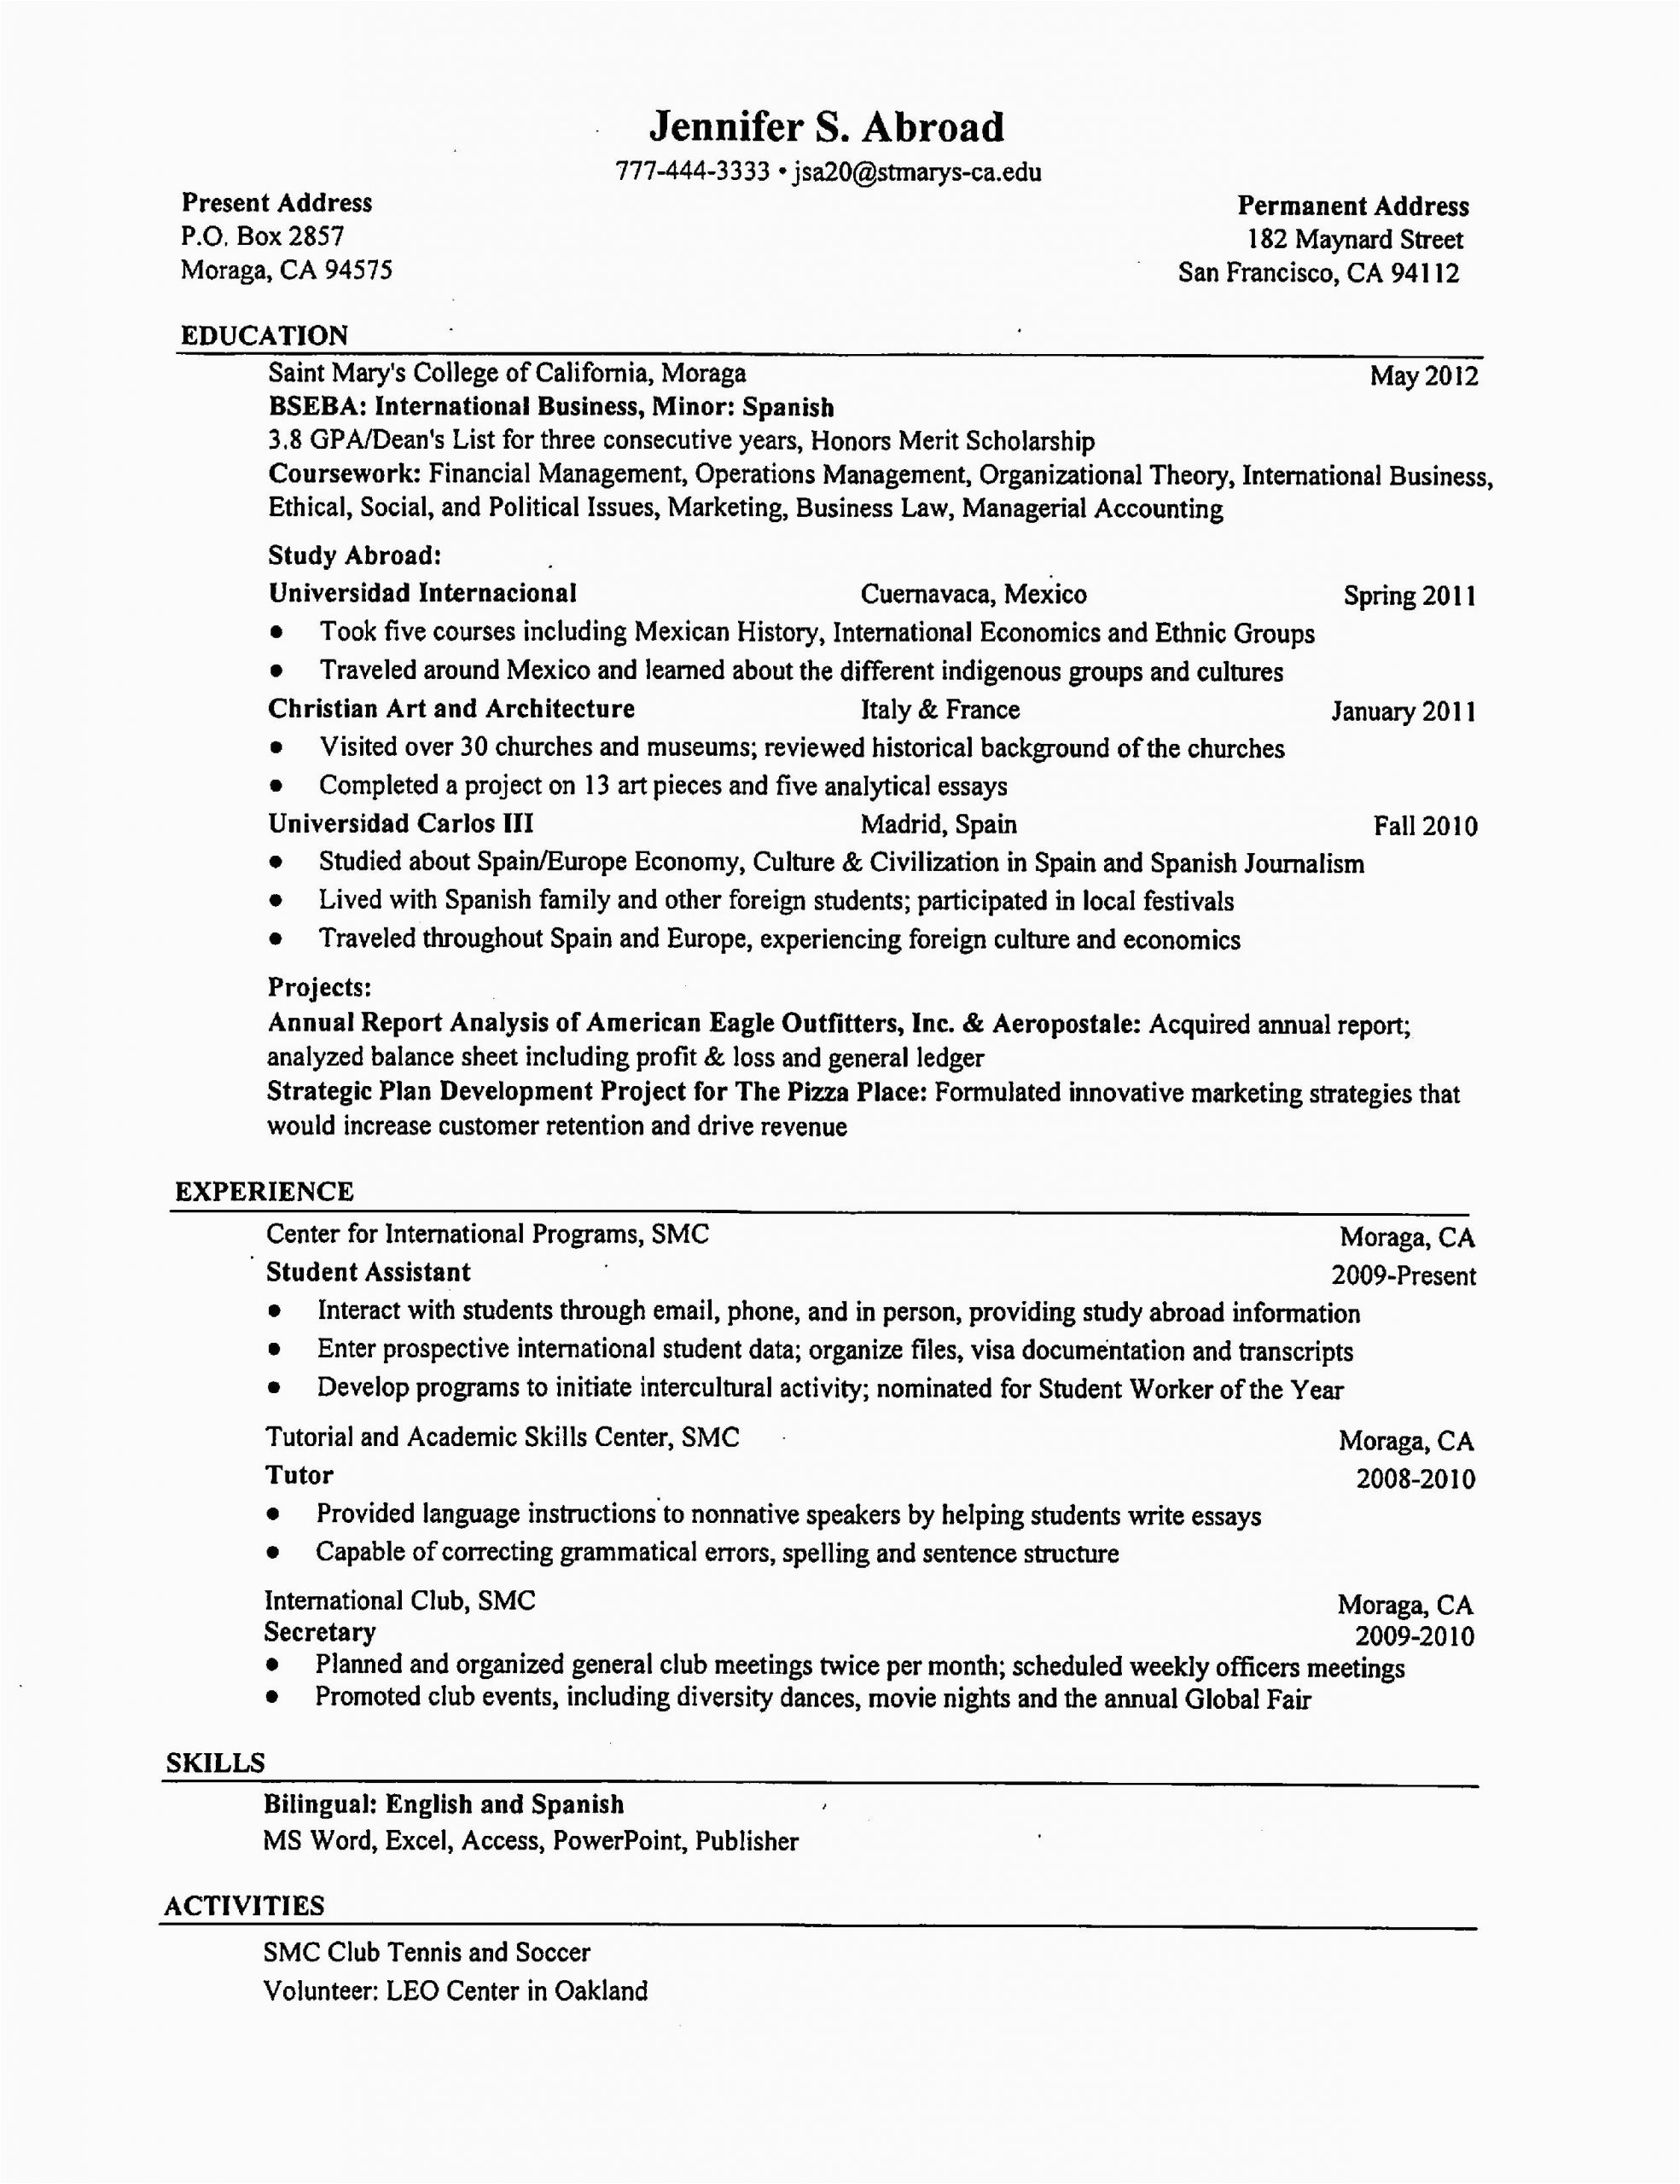 Sample Resume for Study Abroad Application Resume Tips